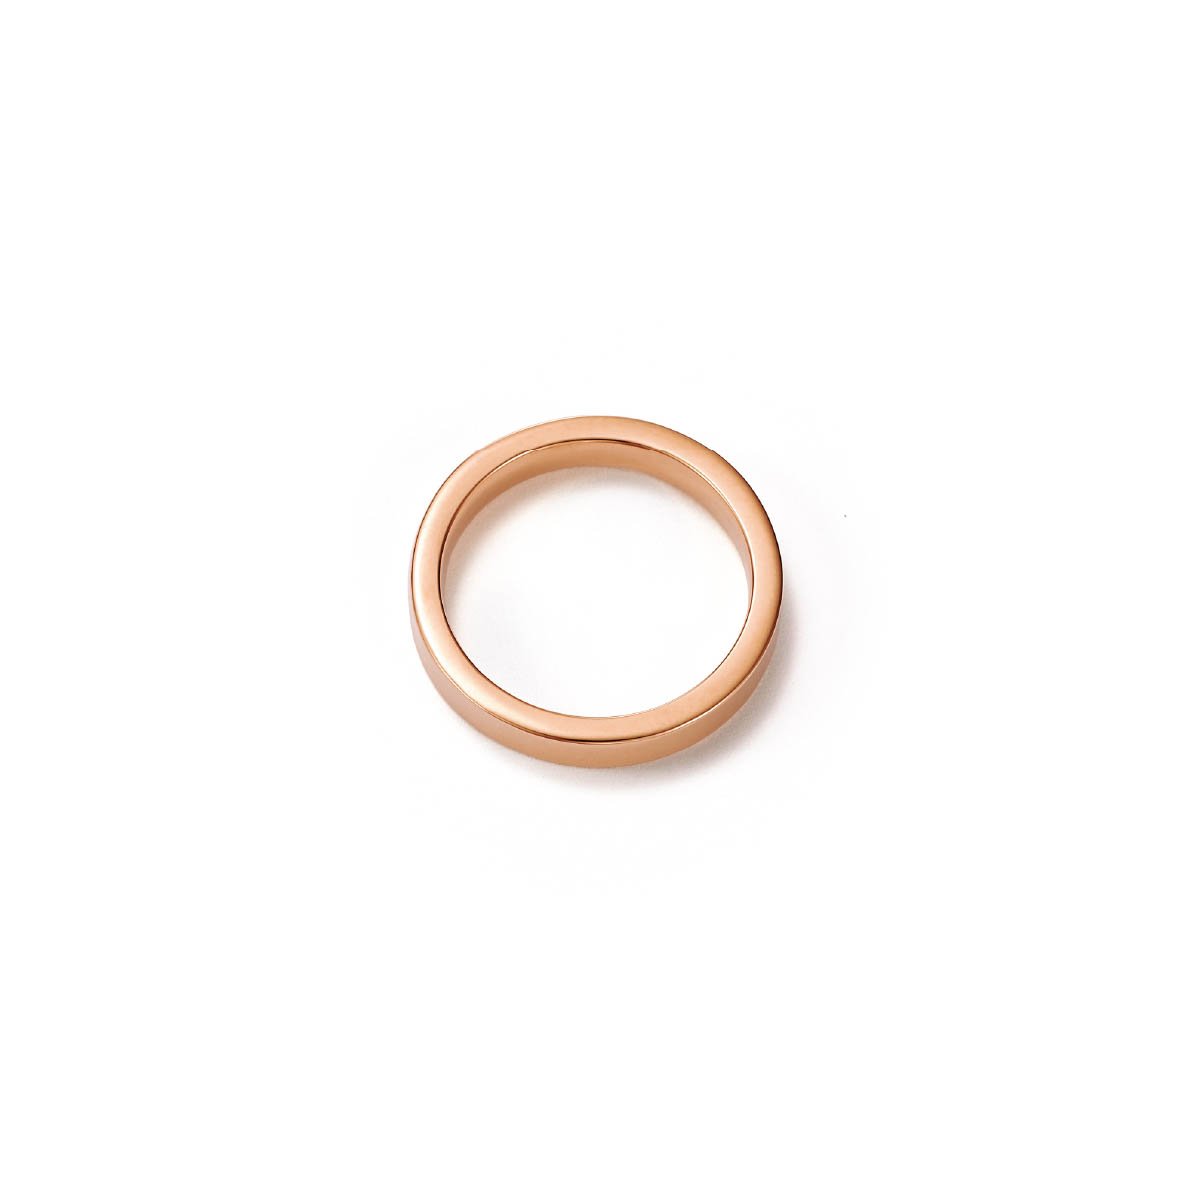 18kt Sustainable Rose Gold Wedding Band - Top View